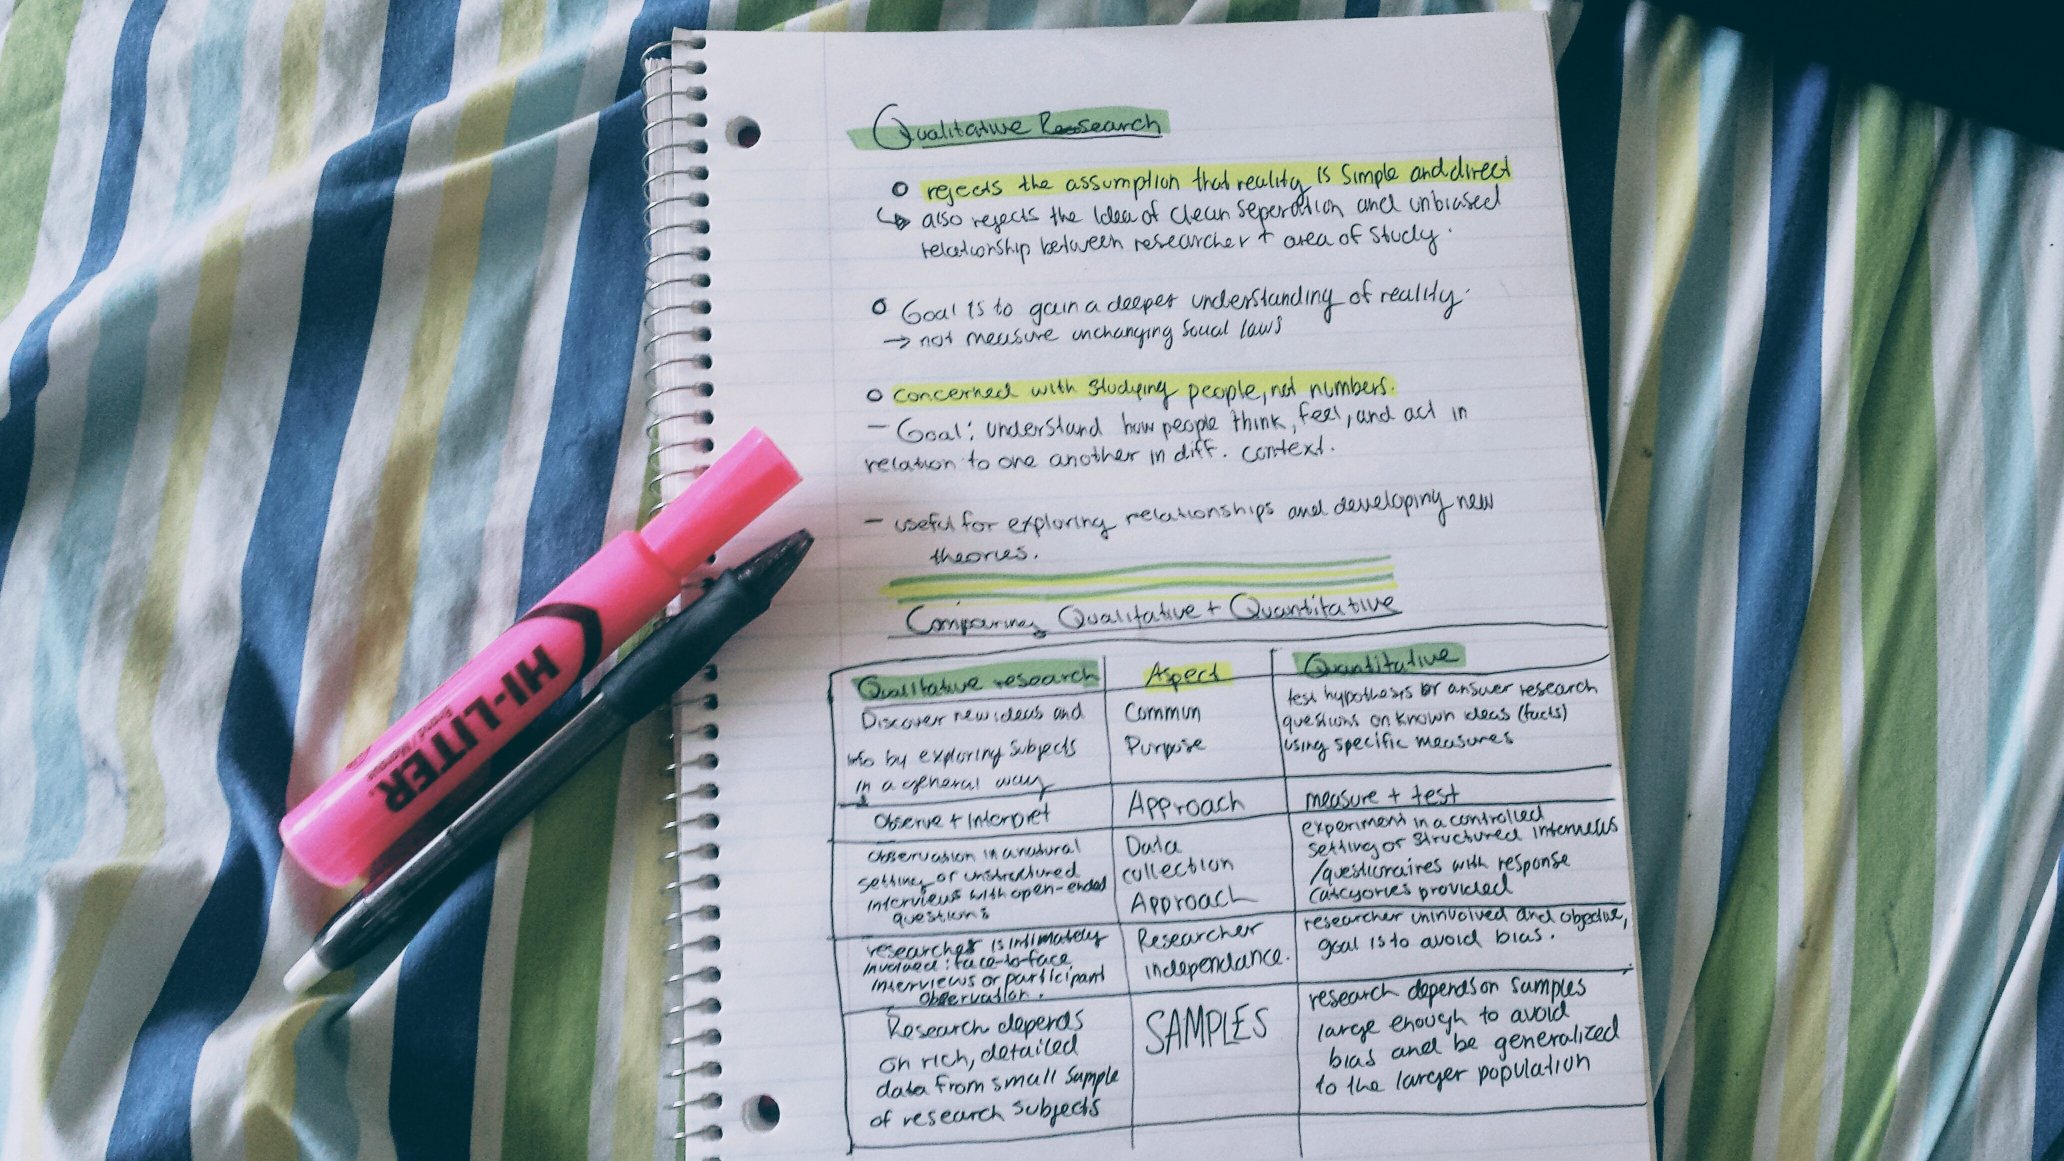 Pictured is an open notebook, face up, littered in bold black lettering and highlighted frequently in yellow and green. Beside said notebook are two writing utensils; a black pen and a pink highlighter.